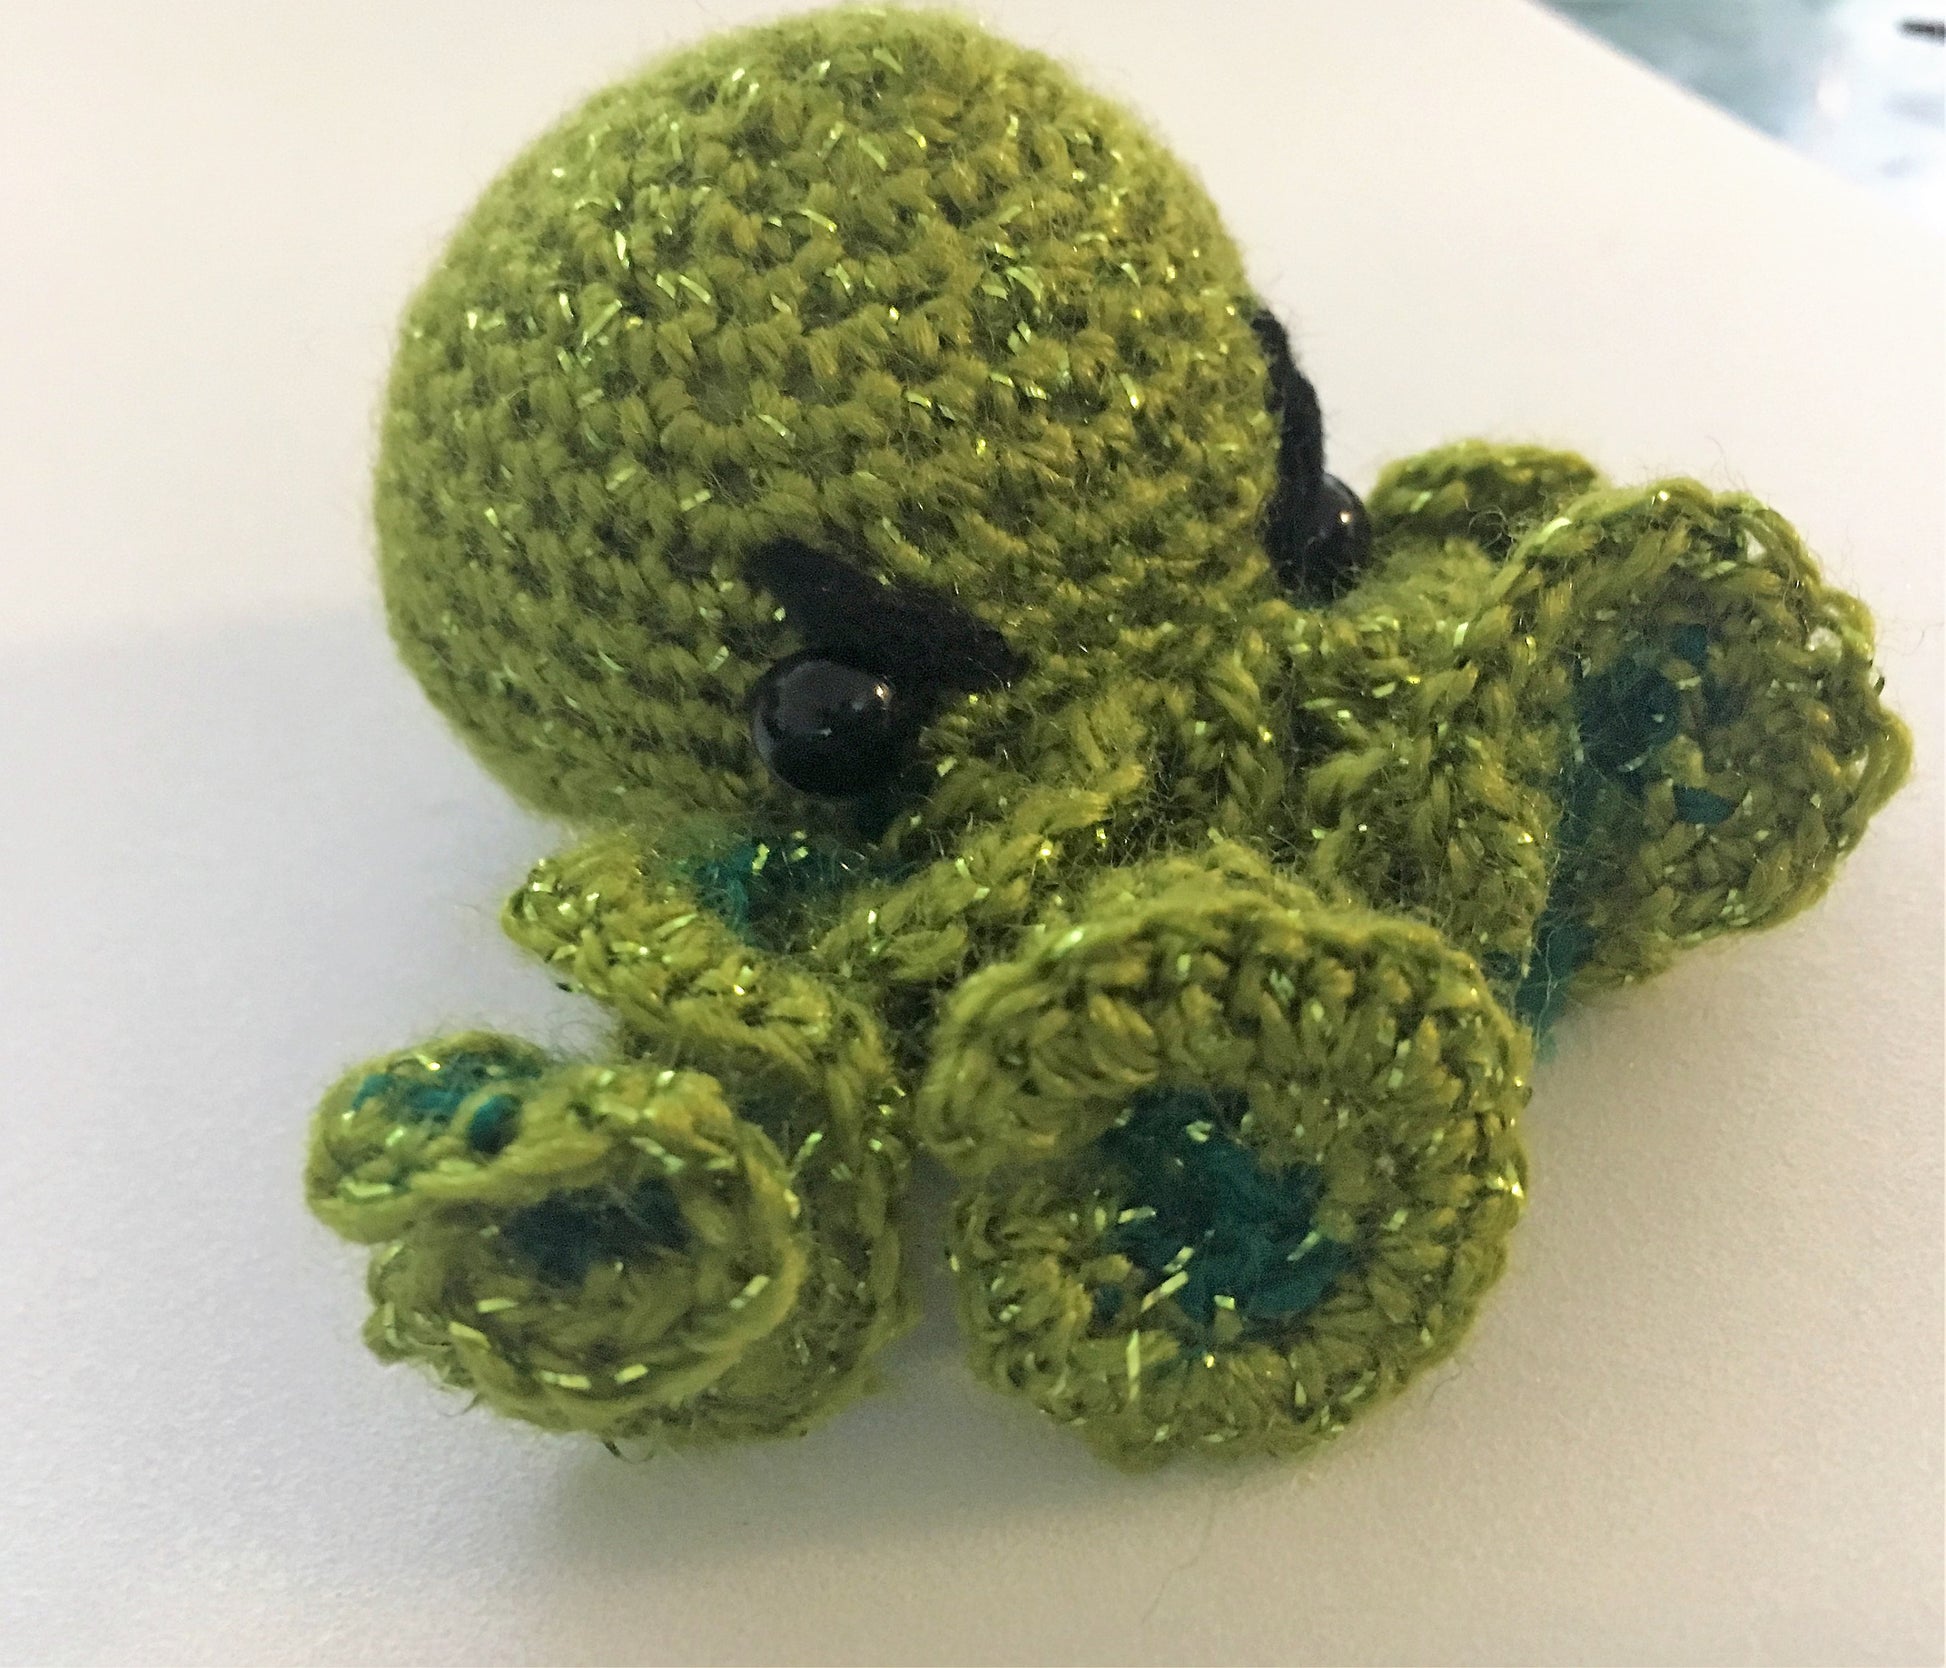 Mini Angry Cthulhu Amigurumi Sparkly Light Green - Stitchy Frood